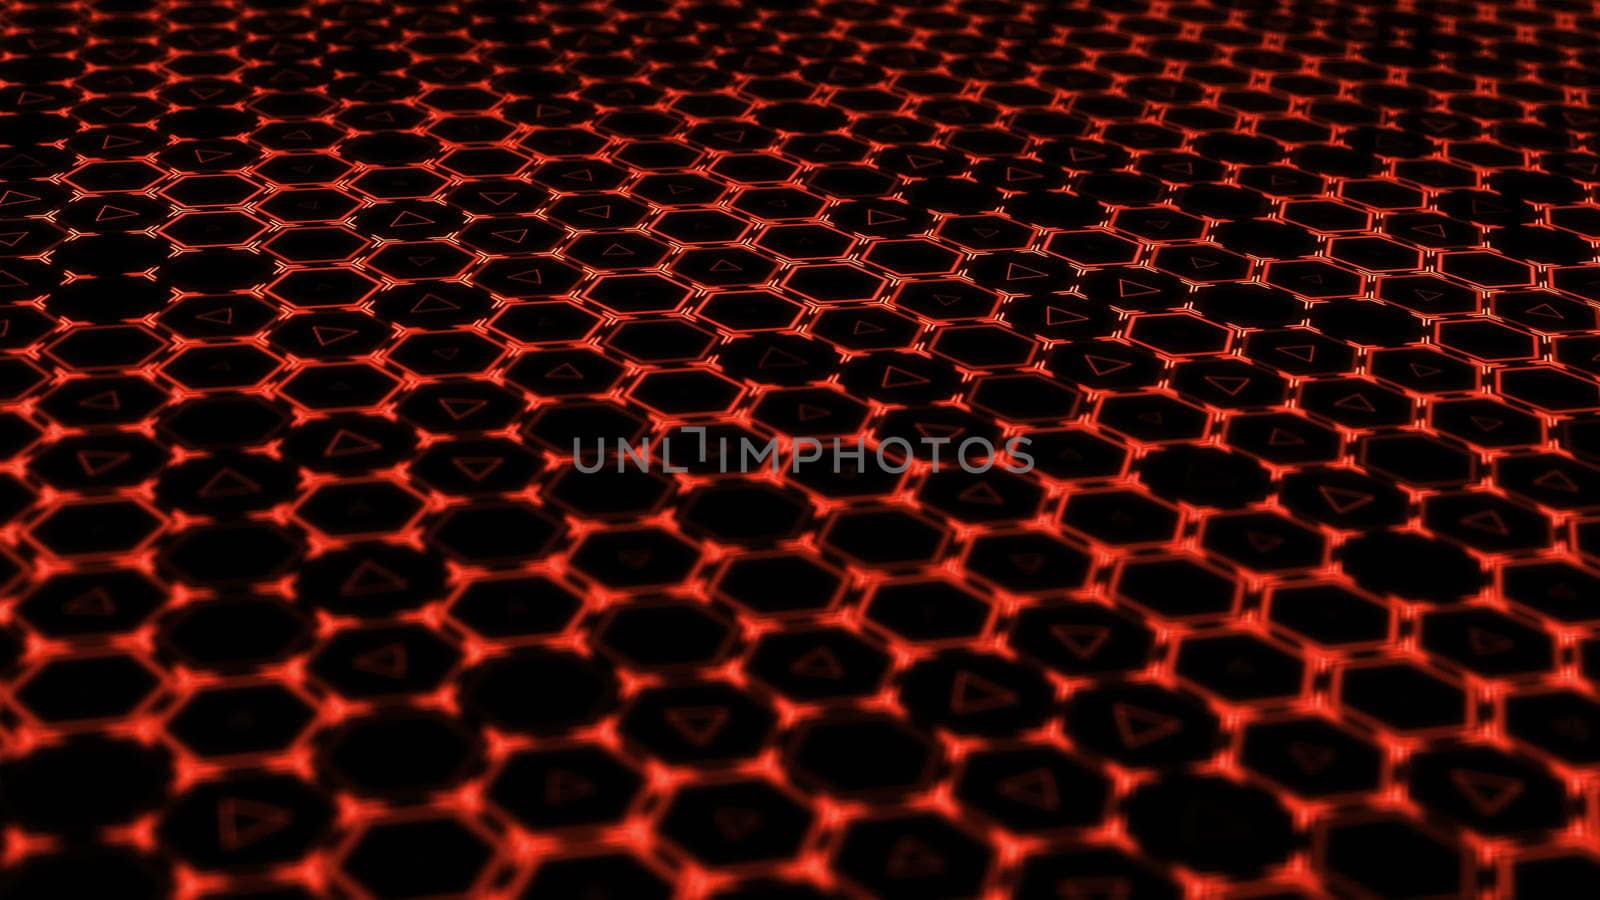 Hexagon technology background with depth of field. 3D rendered